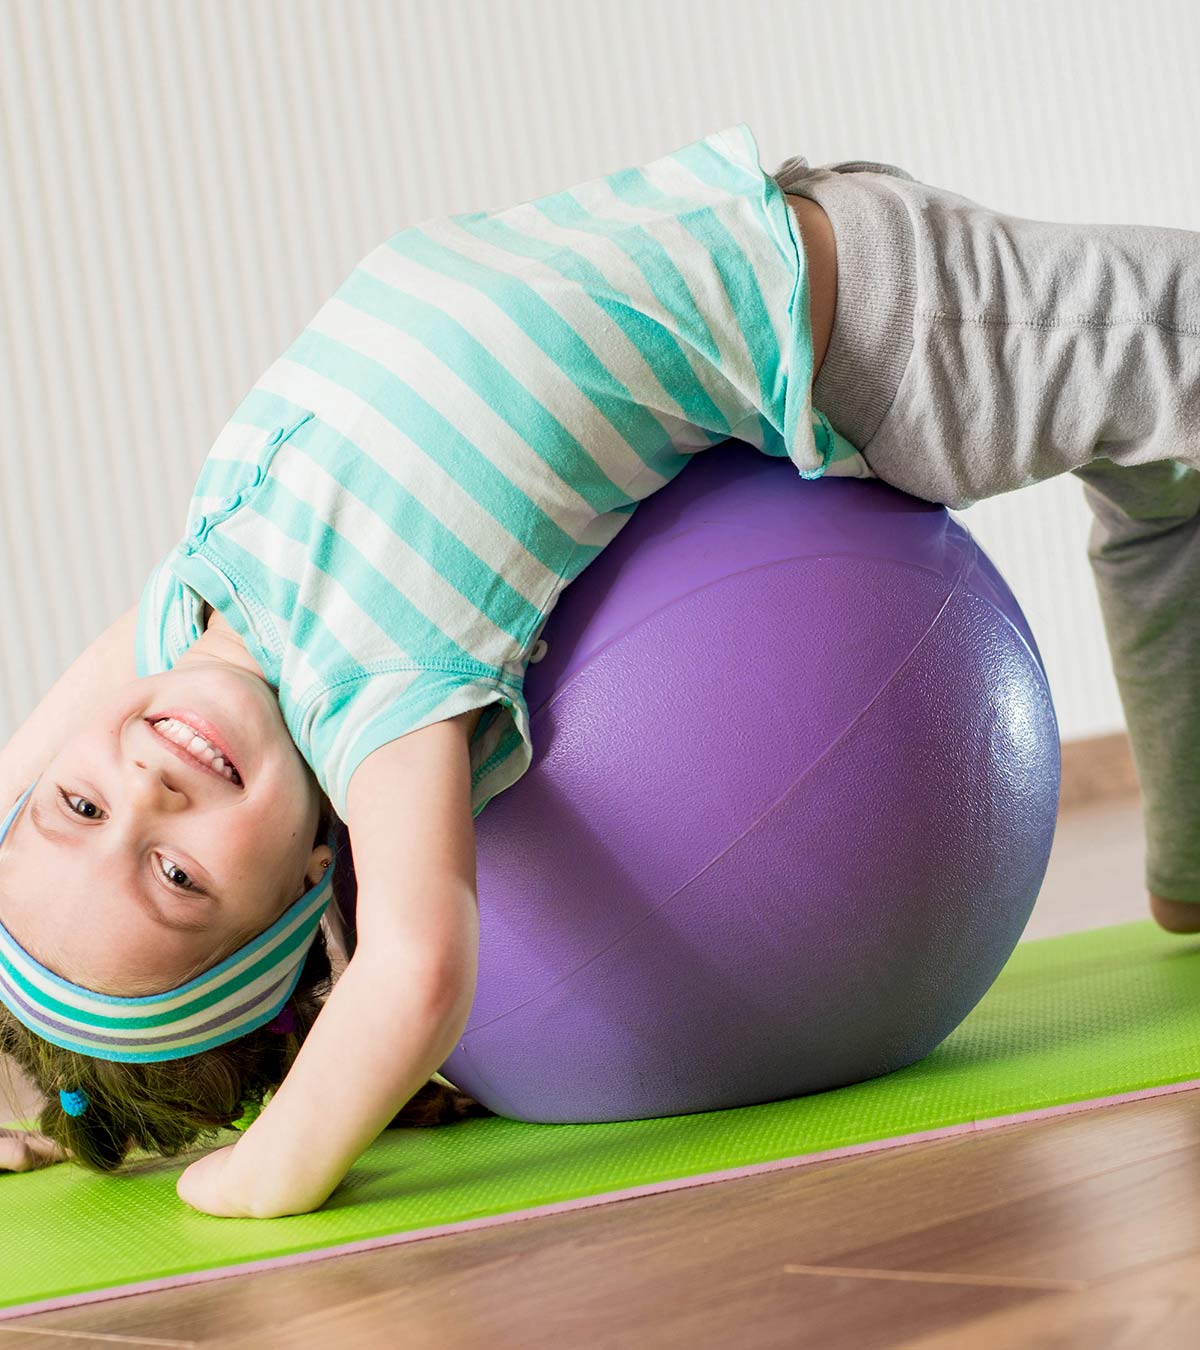 4 Health Benefits Of Pilates For Kids